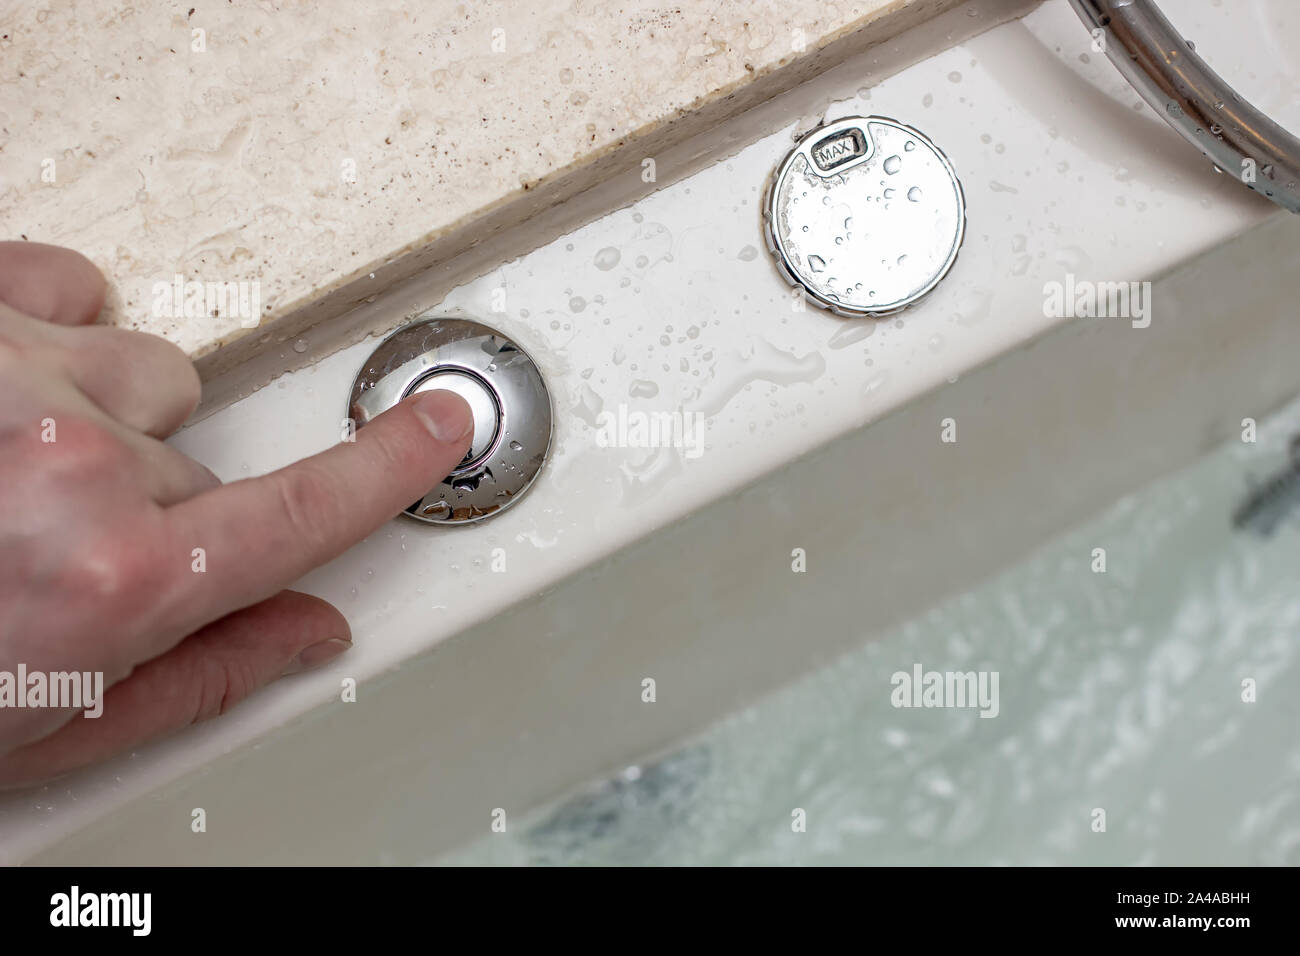 Male hand presses a control button on a modern, luxurious whirlpool bath with clear, warm water. Close-up. Stock Photo